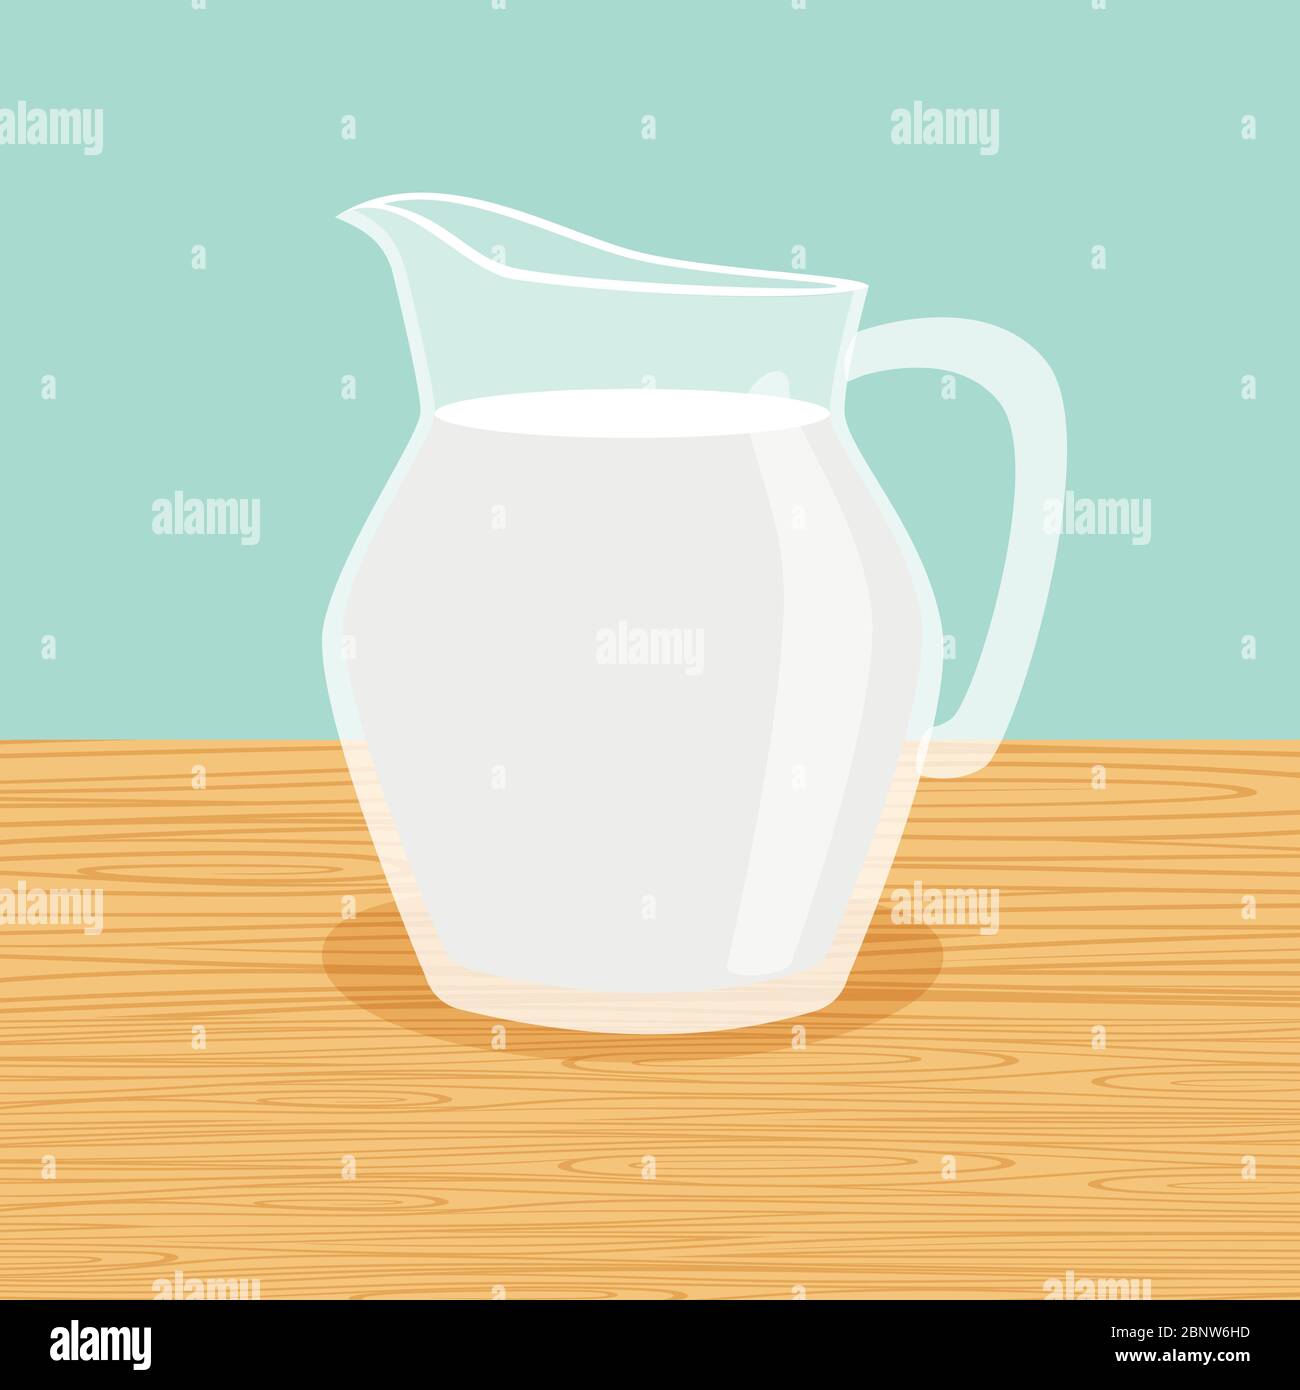 Fresh and natural farm milk carafe on the table vector Stock Vector